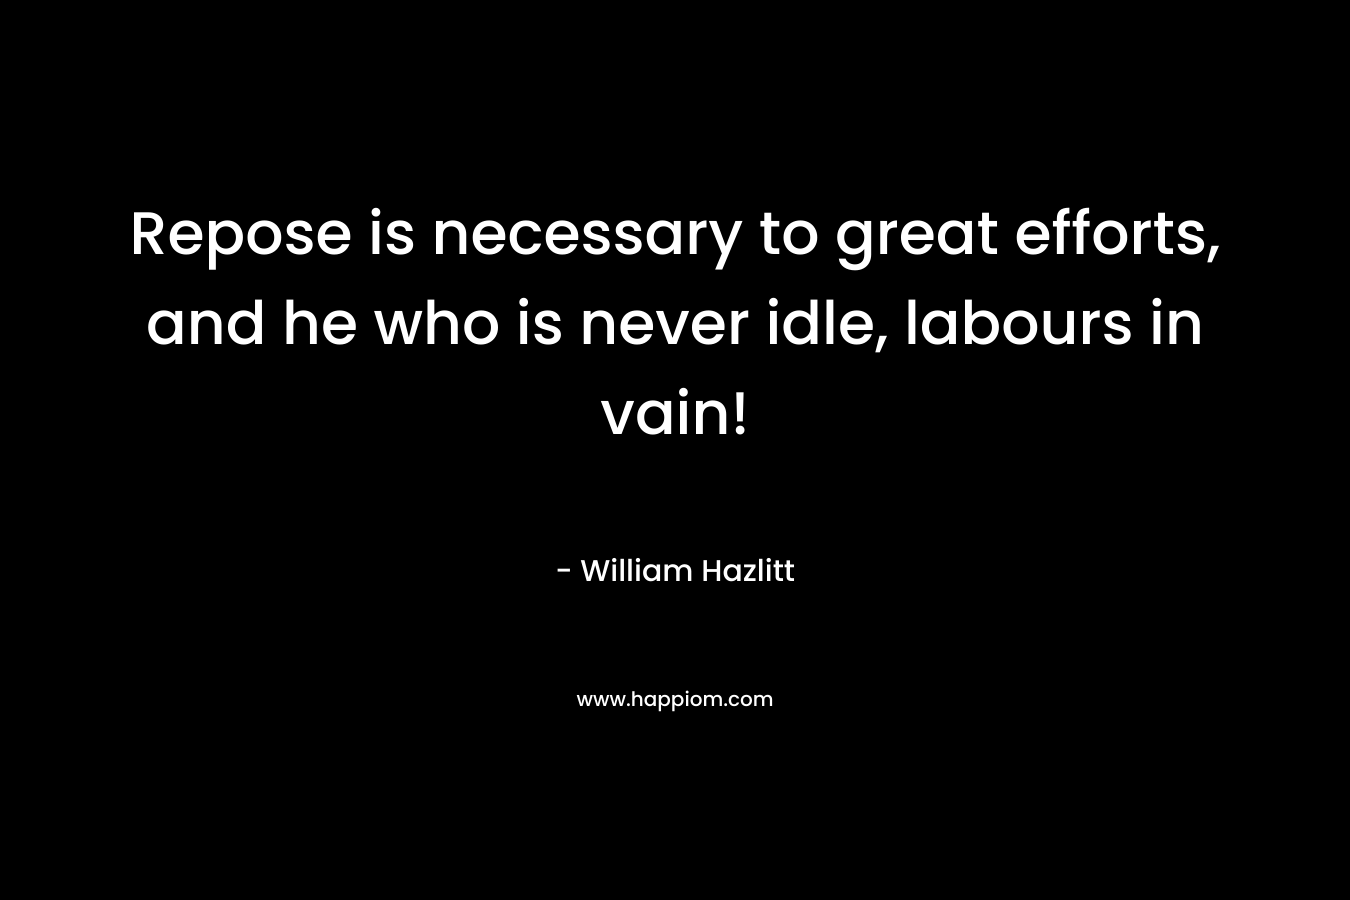 Repose is necessary to great efforts, and he who is never idle, labours in vain! – William Hazlitt